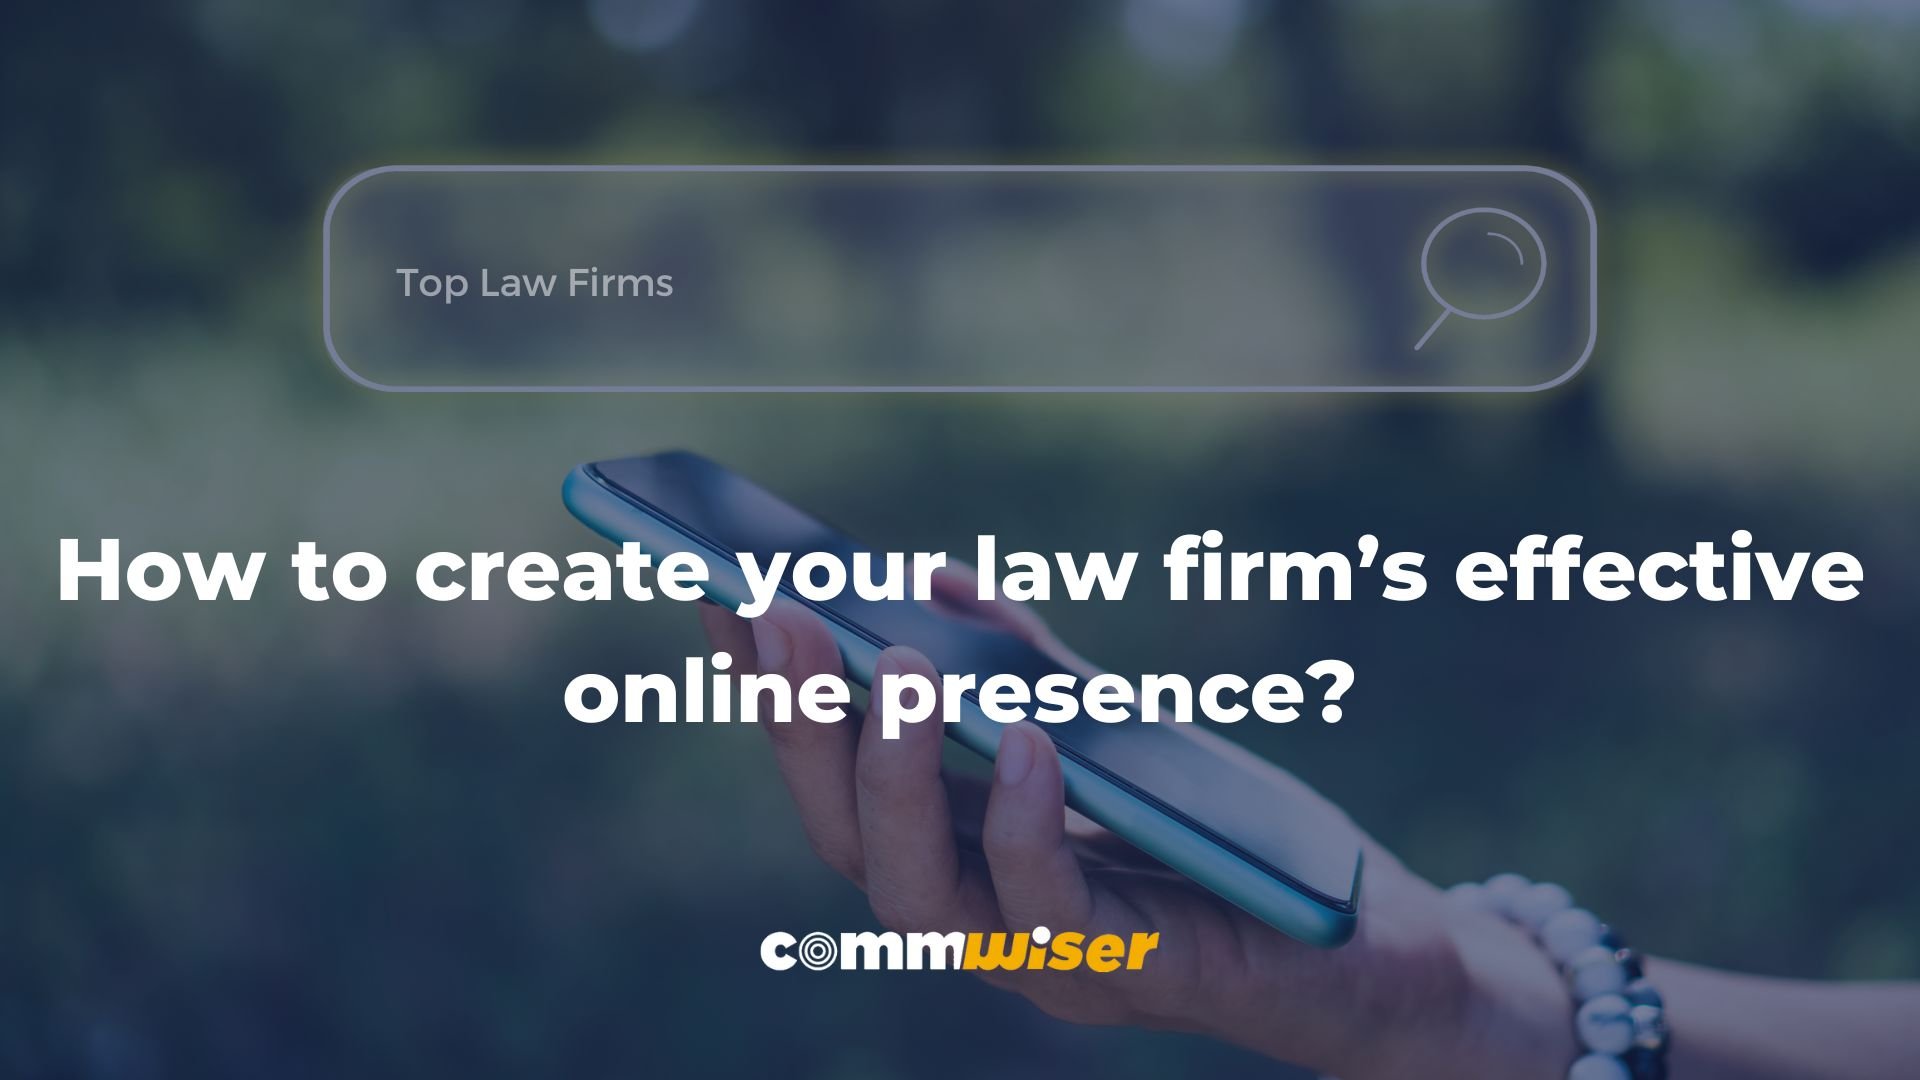 How to create your law firm’s effective online presence